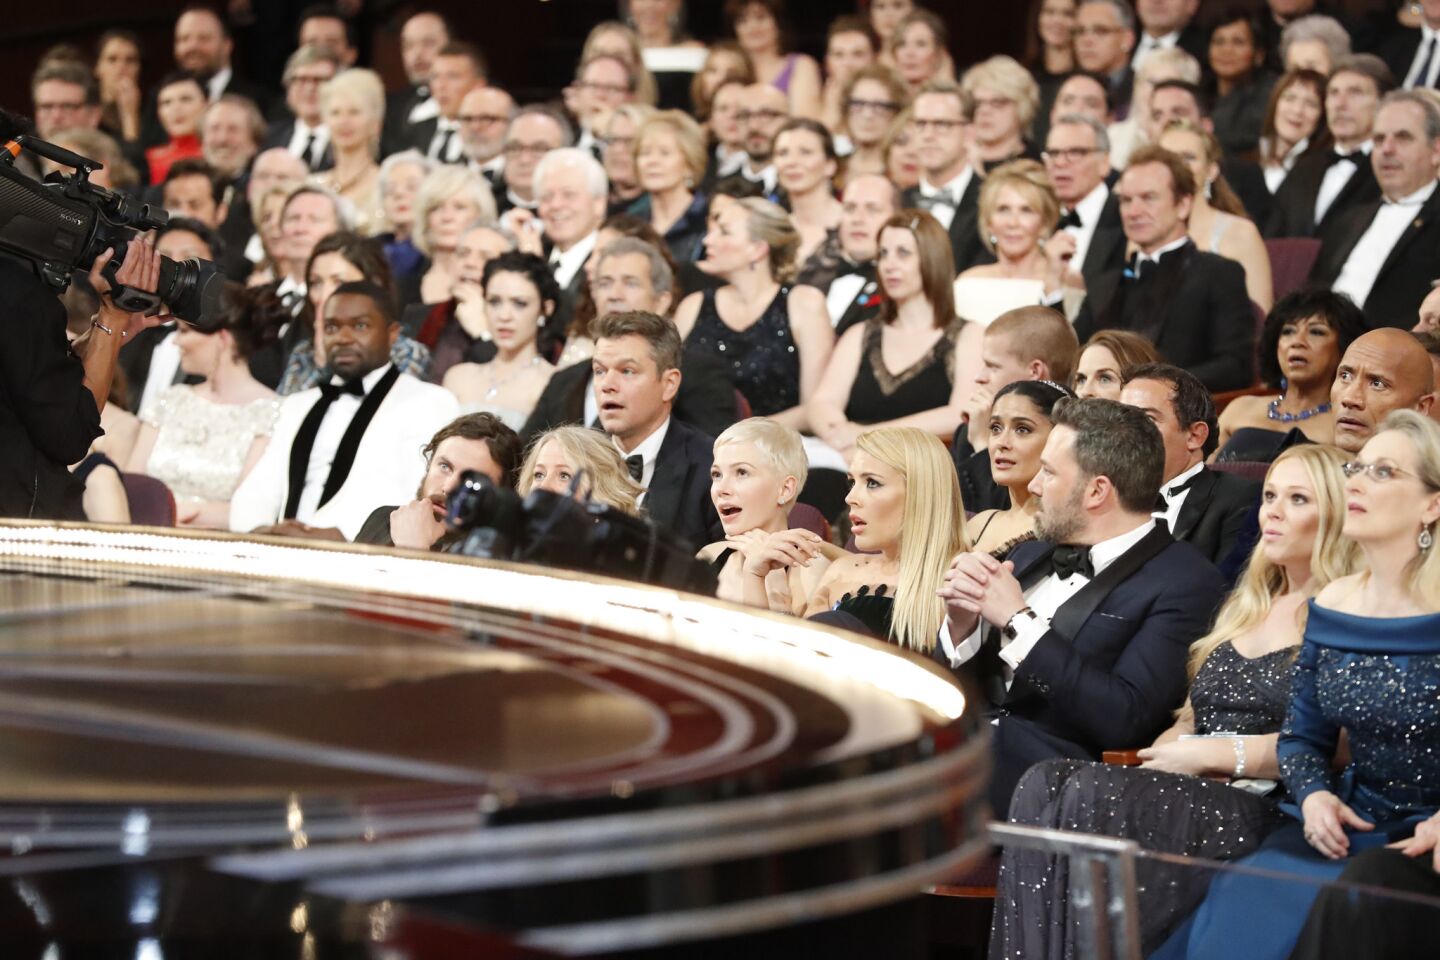 The audience at the Dolby Theatre is stunned after the best picture award is mistakenly announced as "La La Land" instead of "Moonlight" during the 89th Academy Awards.